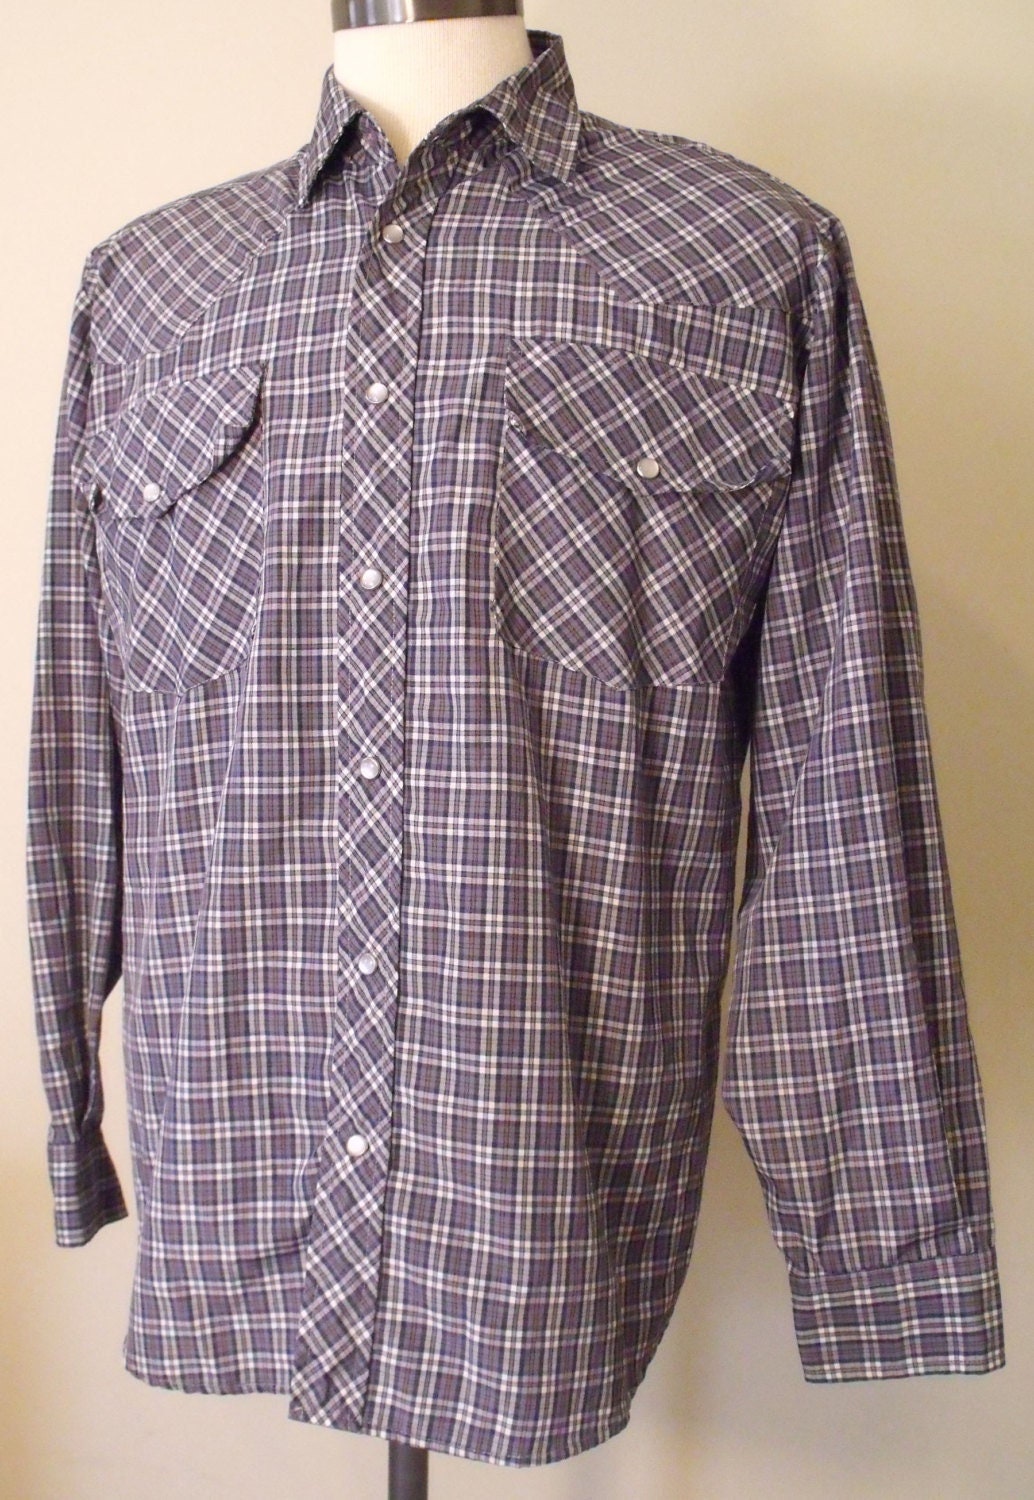 Vintage Plaid Western Snap Shirt by Haband